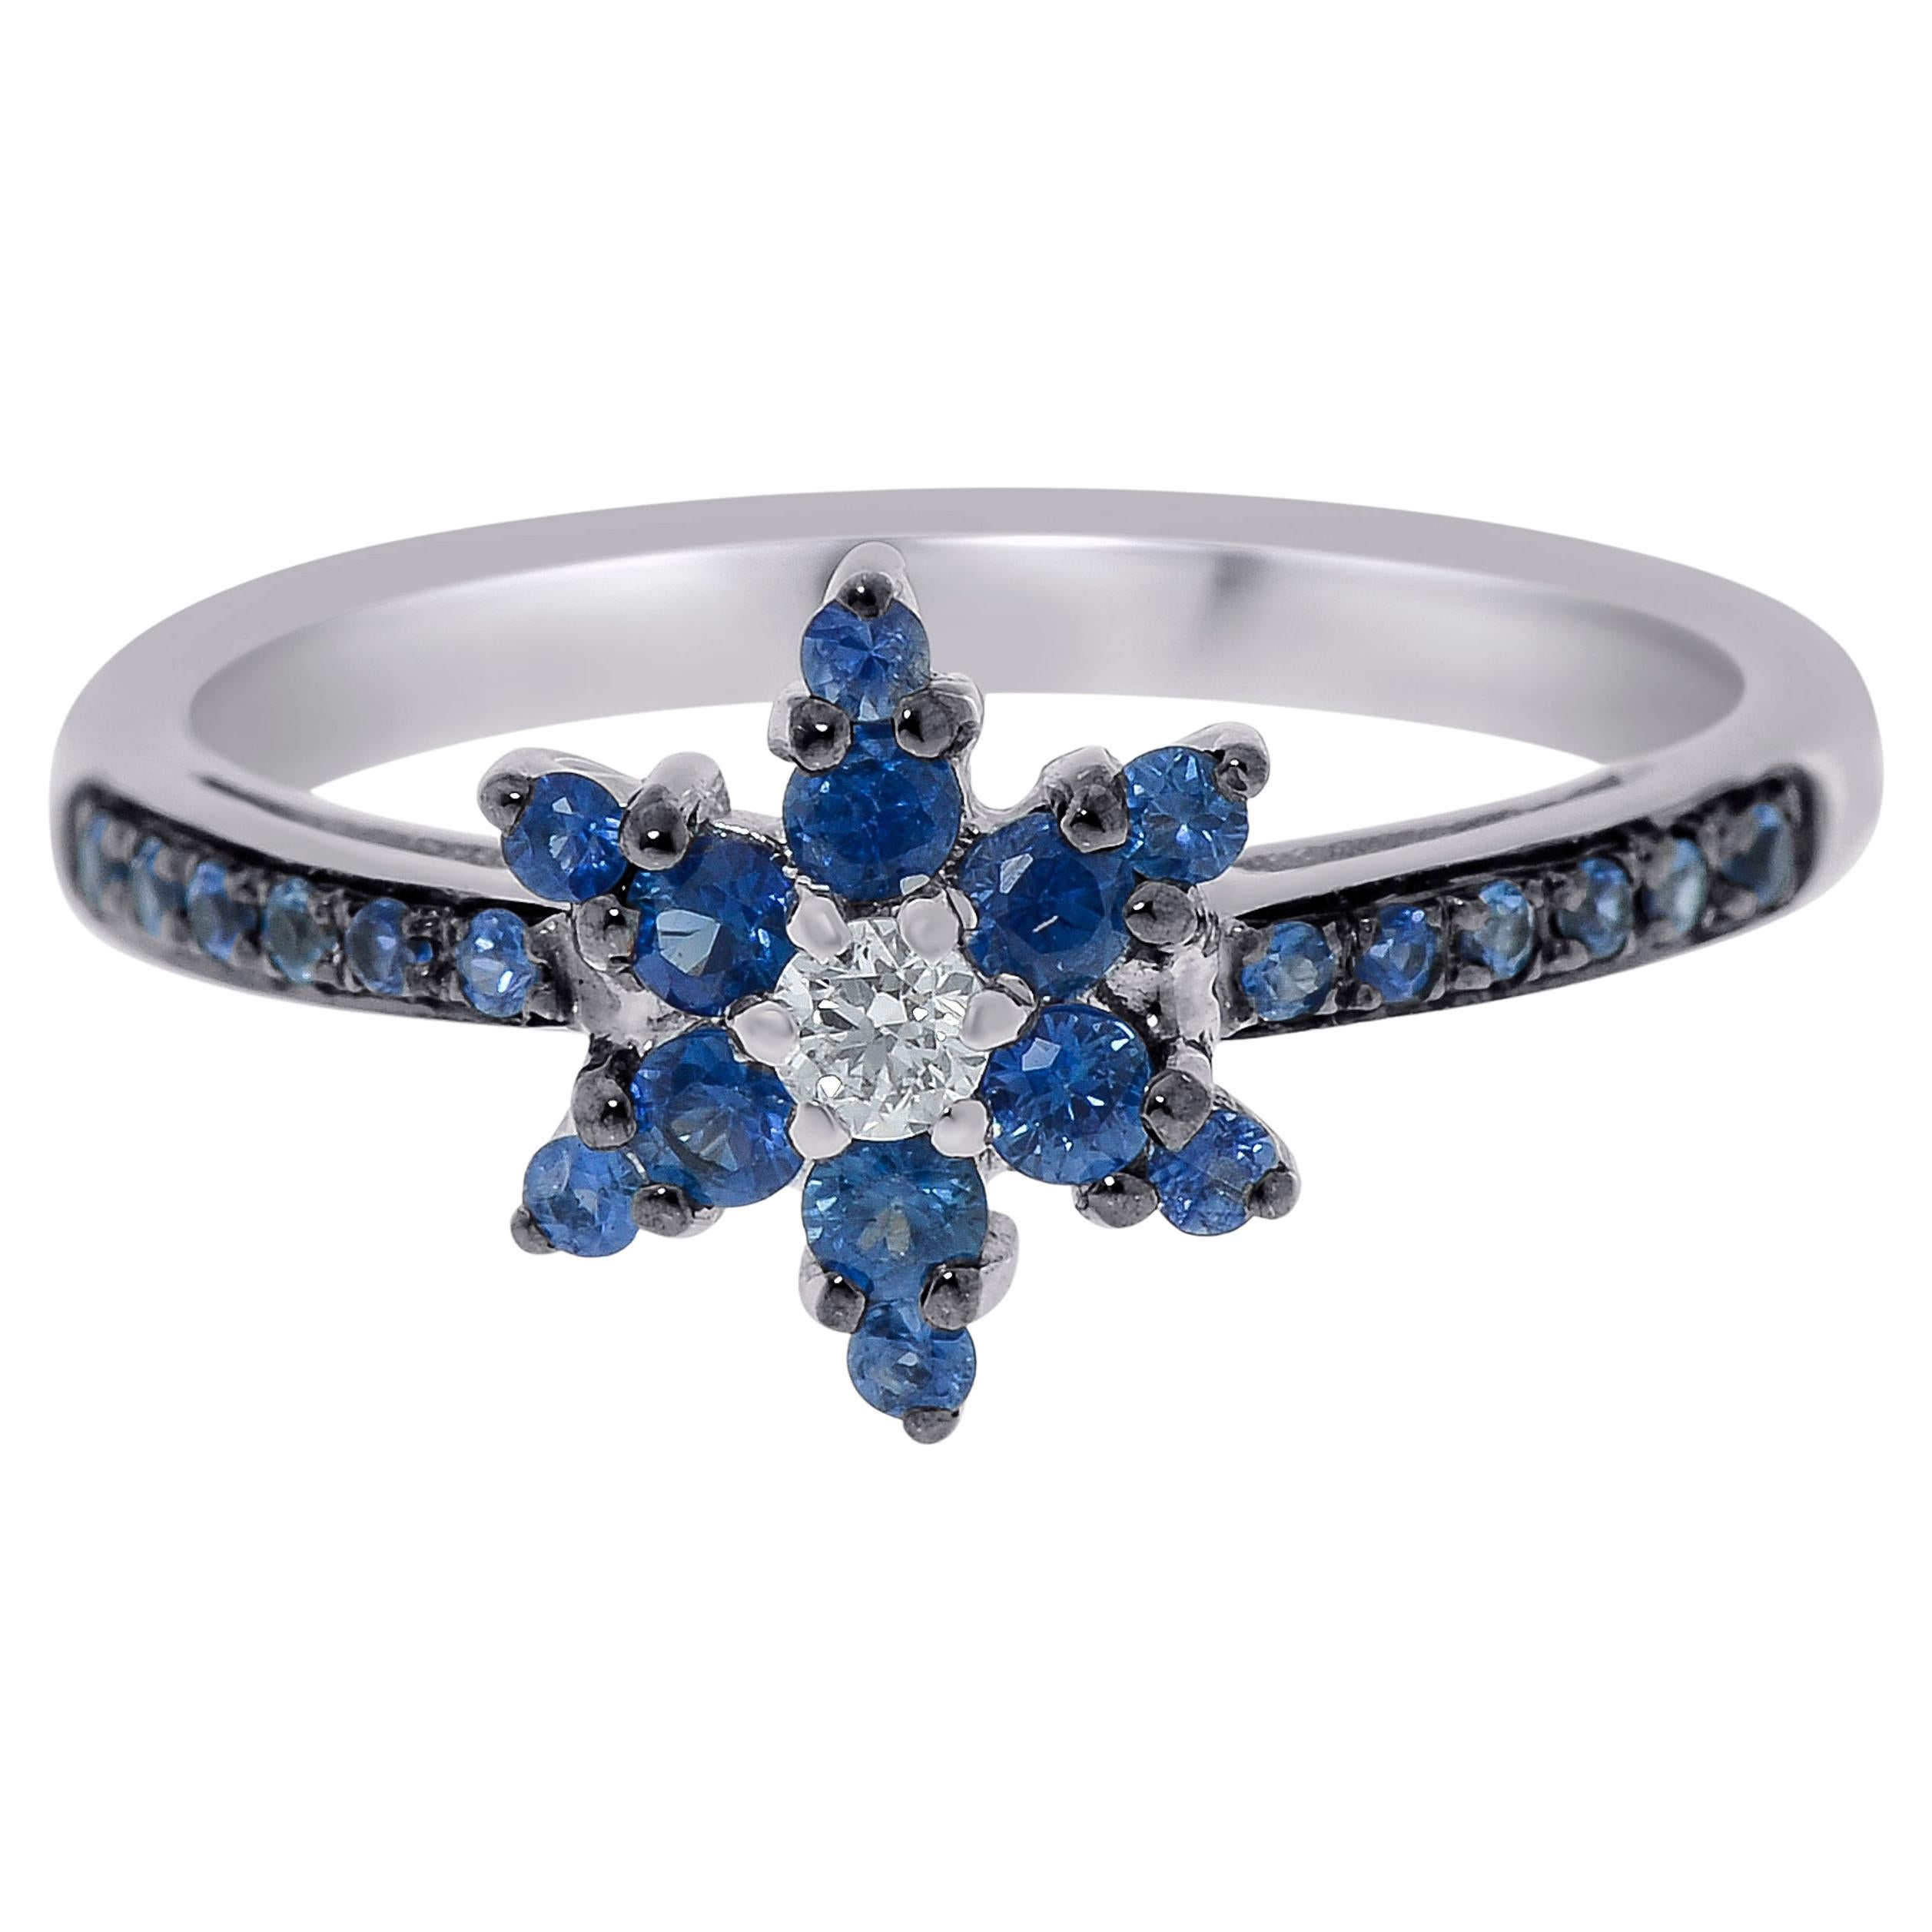 Zydo 18K White Gold, Sapphire and Diamond Band Ring sz. 7 For Sale